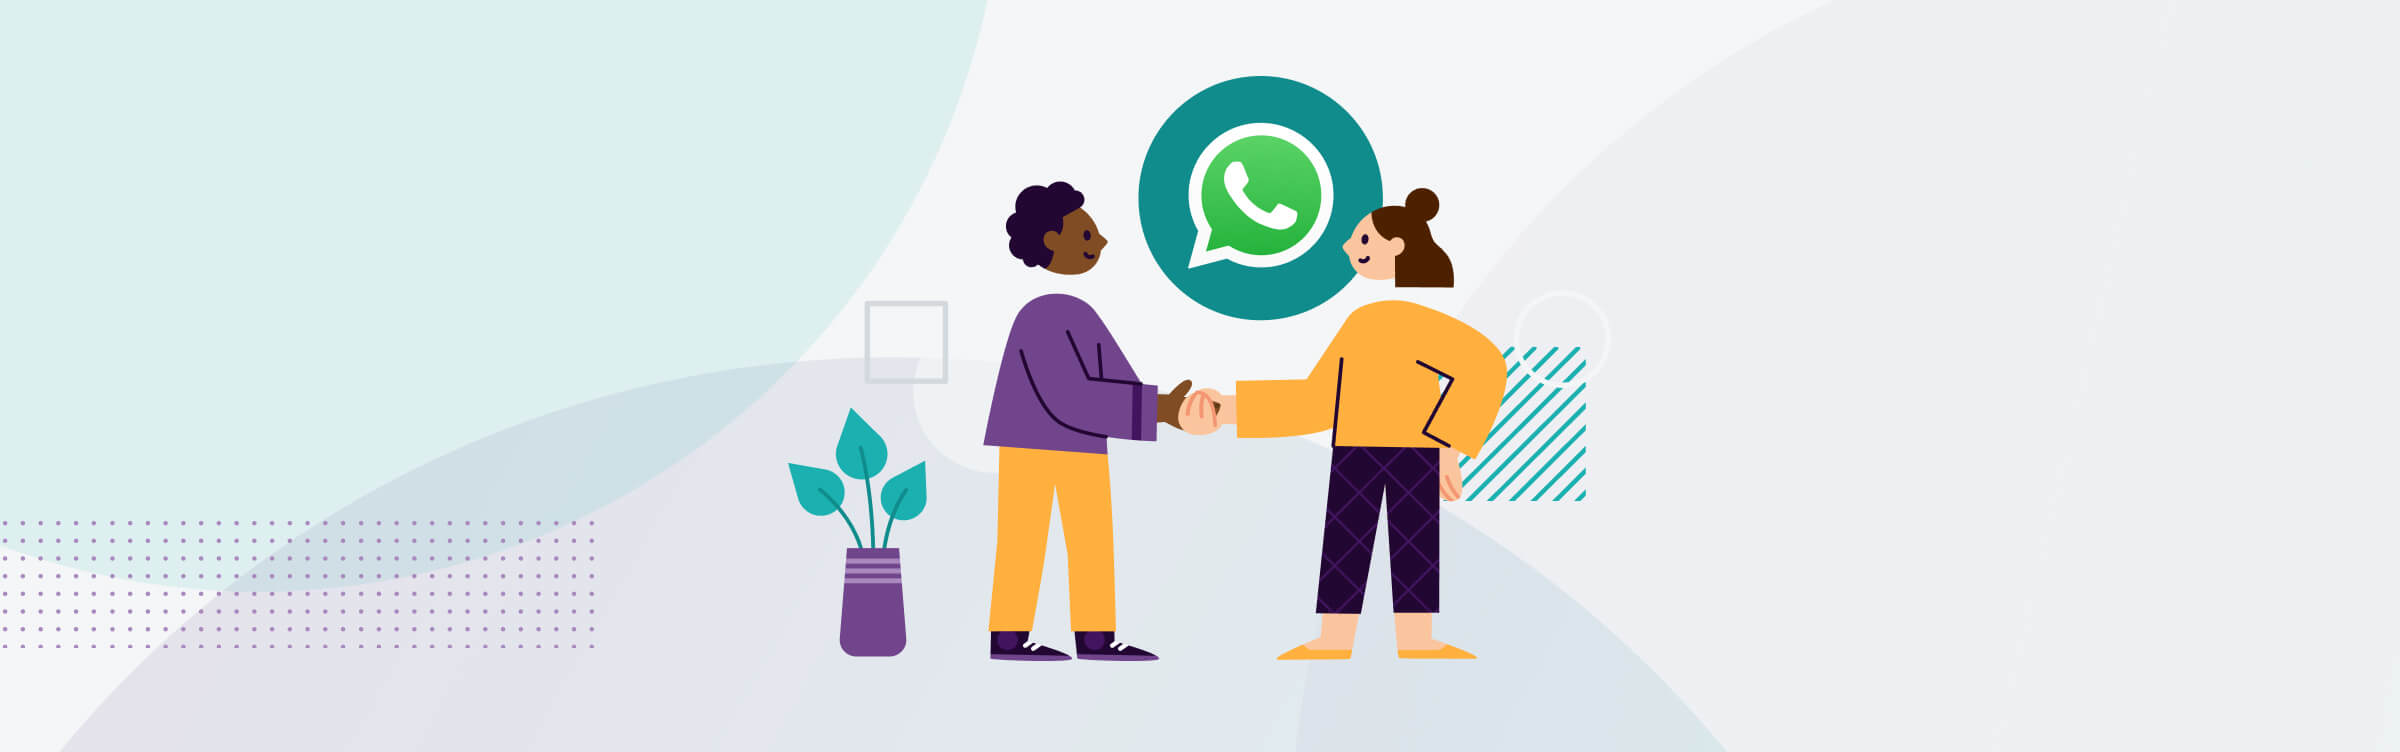 Image showing how WhatsApp Business Platform can lead to building stronger relationships in business. Shown through 2 people shaking hands and the WhatsApp icon in between them.